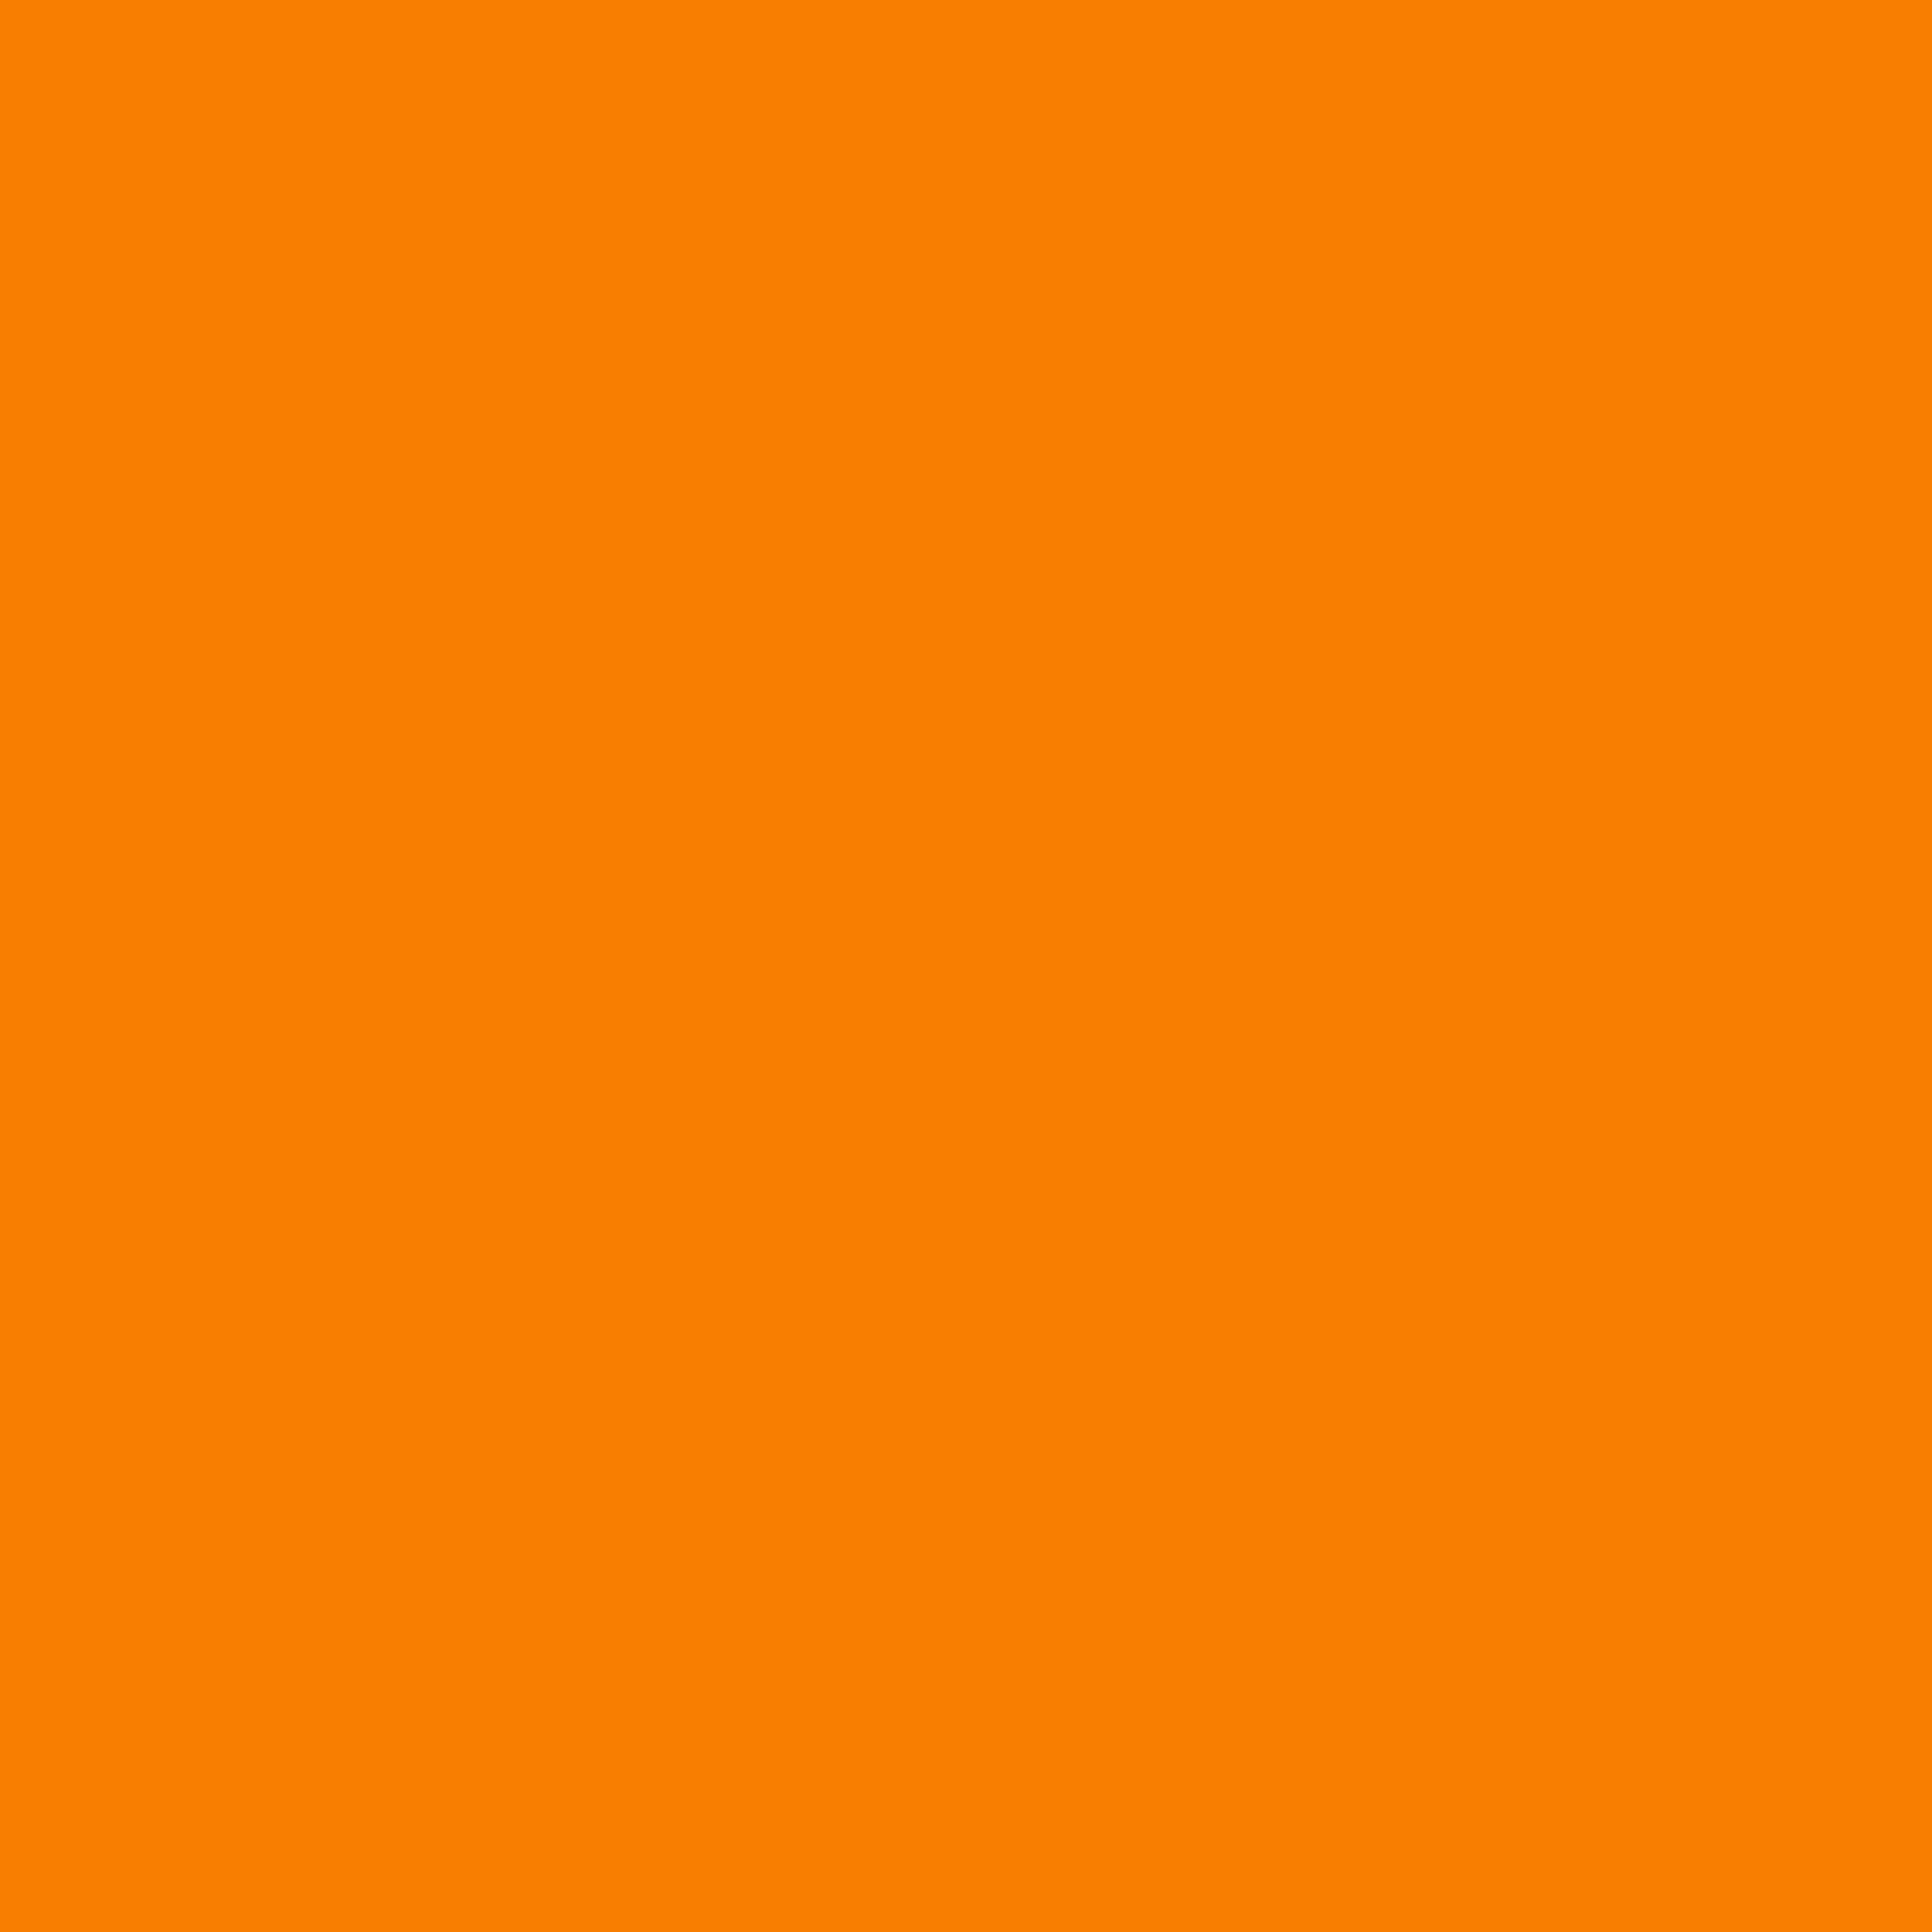 2048x2048-university-of-tennessee-orange-solid-color-background.jpg